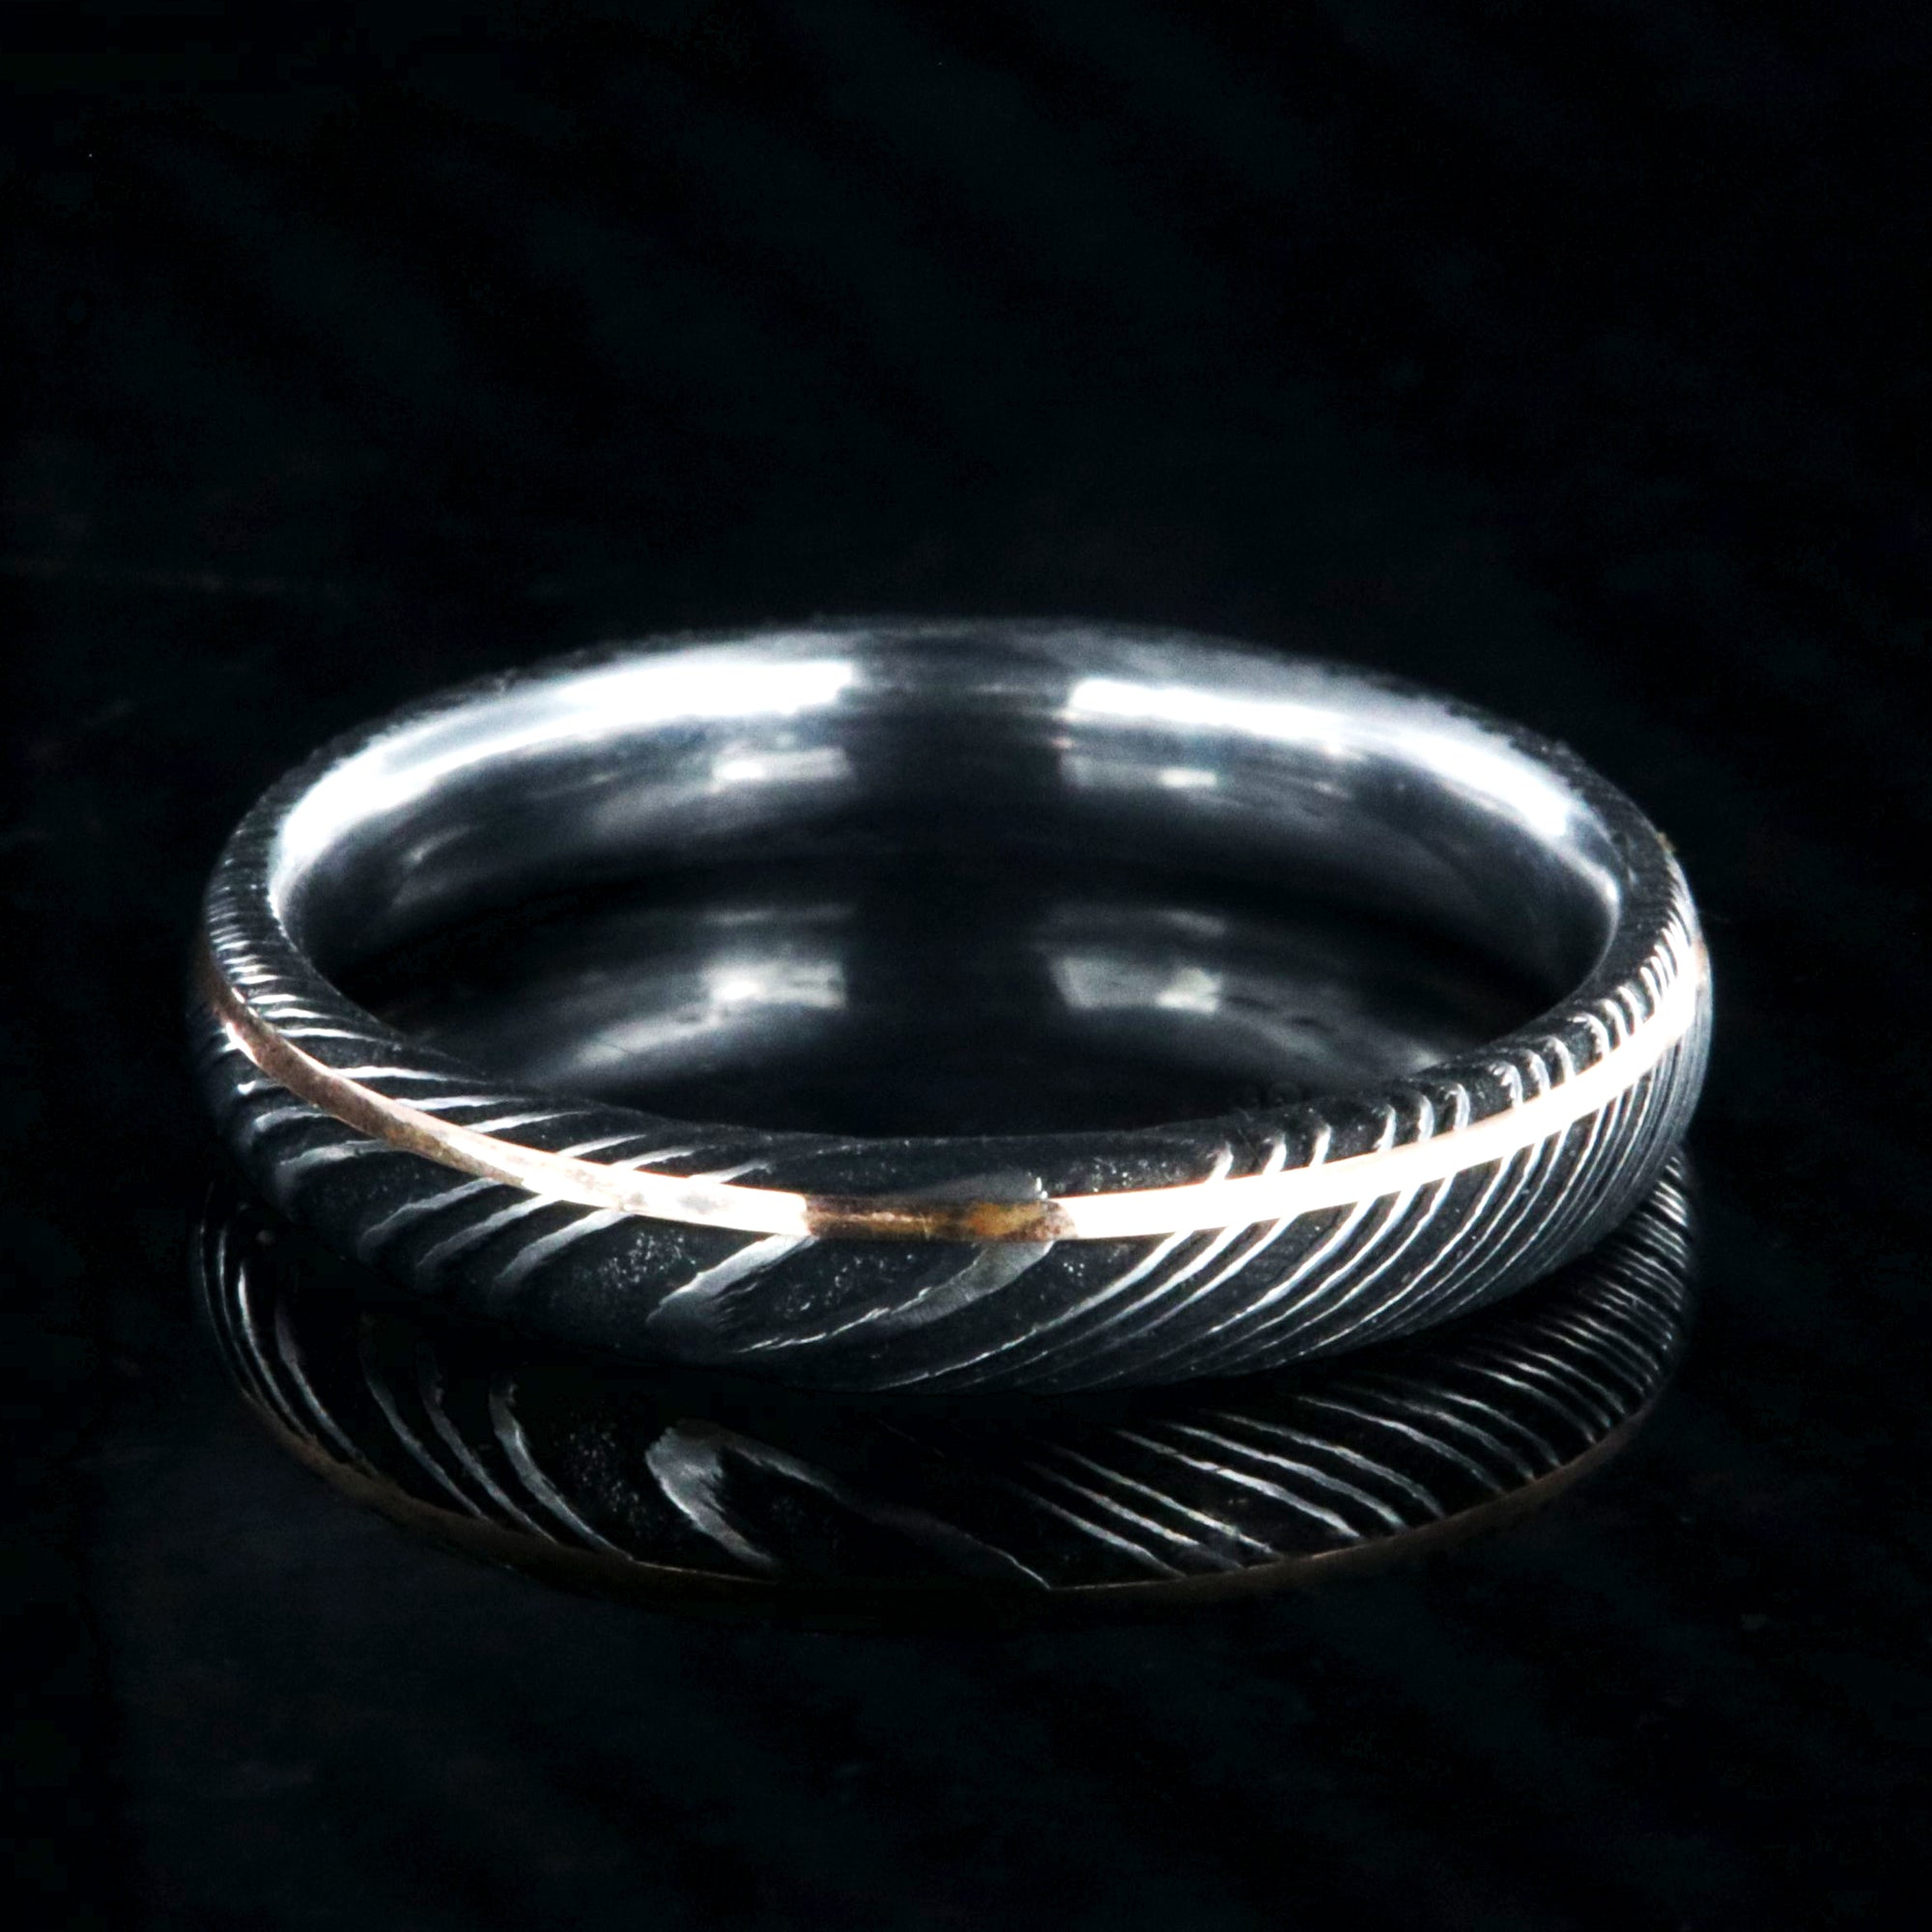 4mm wide black Damascus steel ring with ultra thin rose gold off-center inlay with polished inside